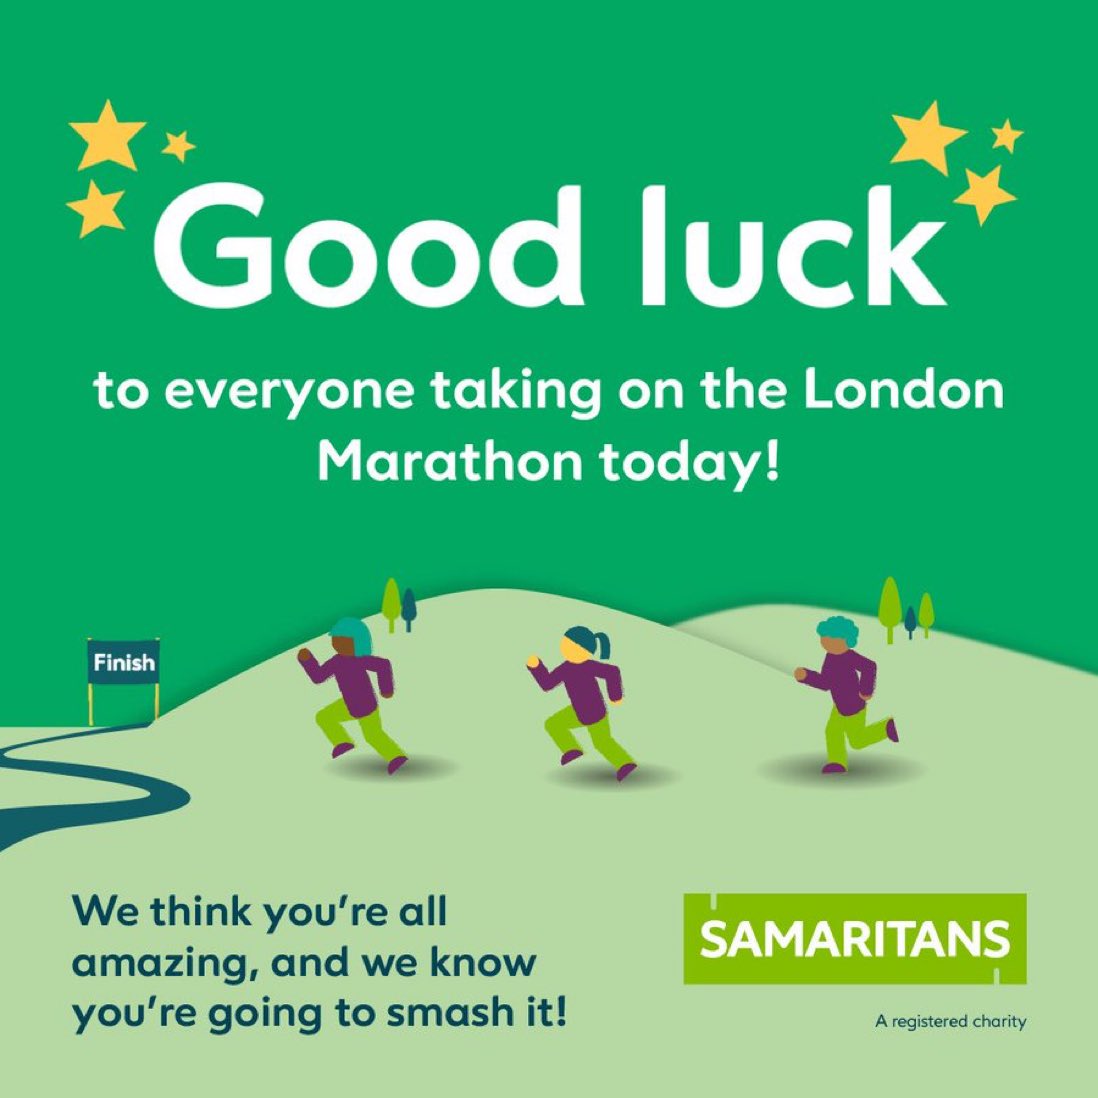 🏃‍♂️🏃‍♀️ Today marks the London Marathon, and @Samaritans are their Charity of the year! Good luck to all the individuals running for Samaritans—your strides make a difference 🏃💚 #LondonMarathon